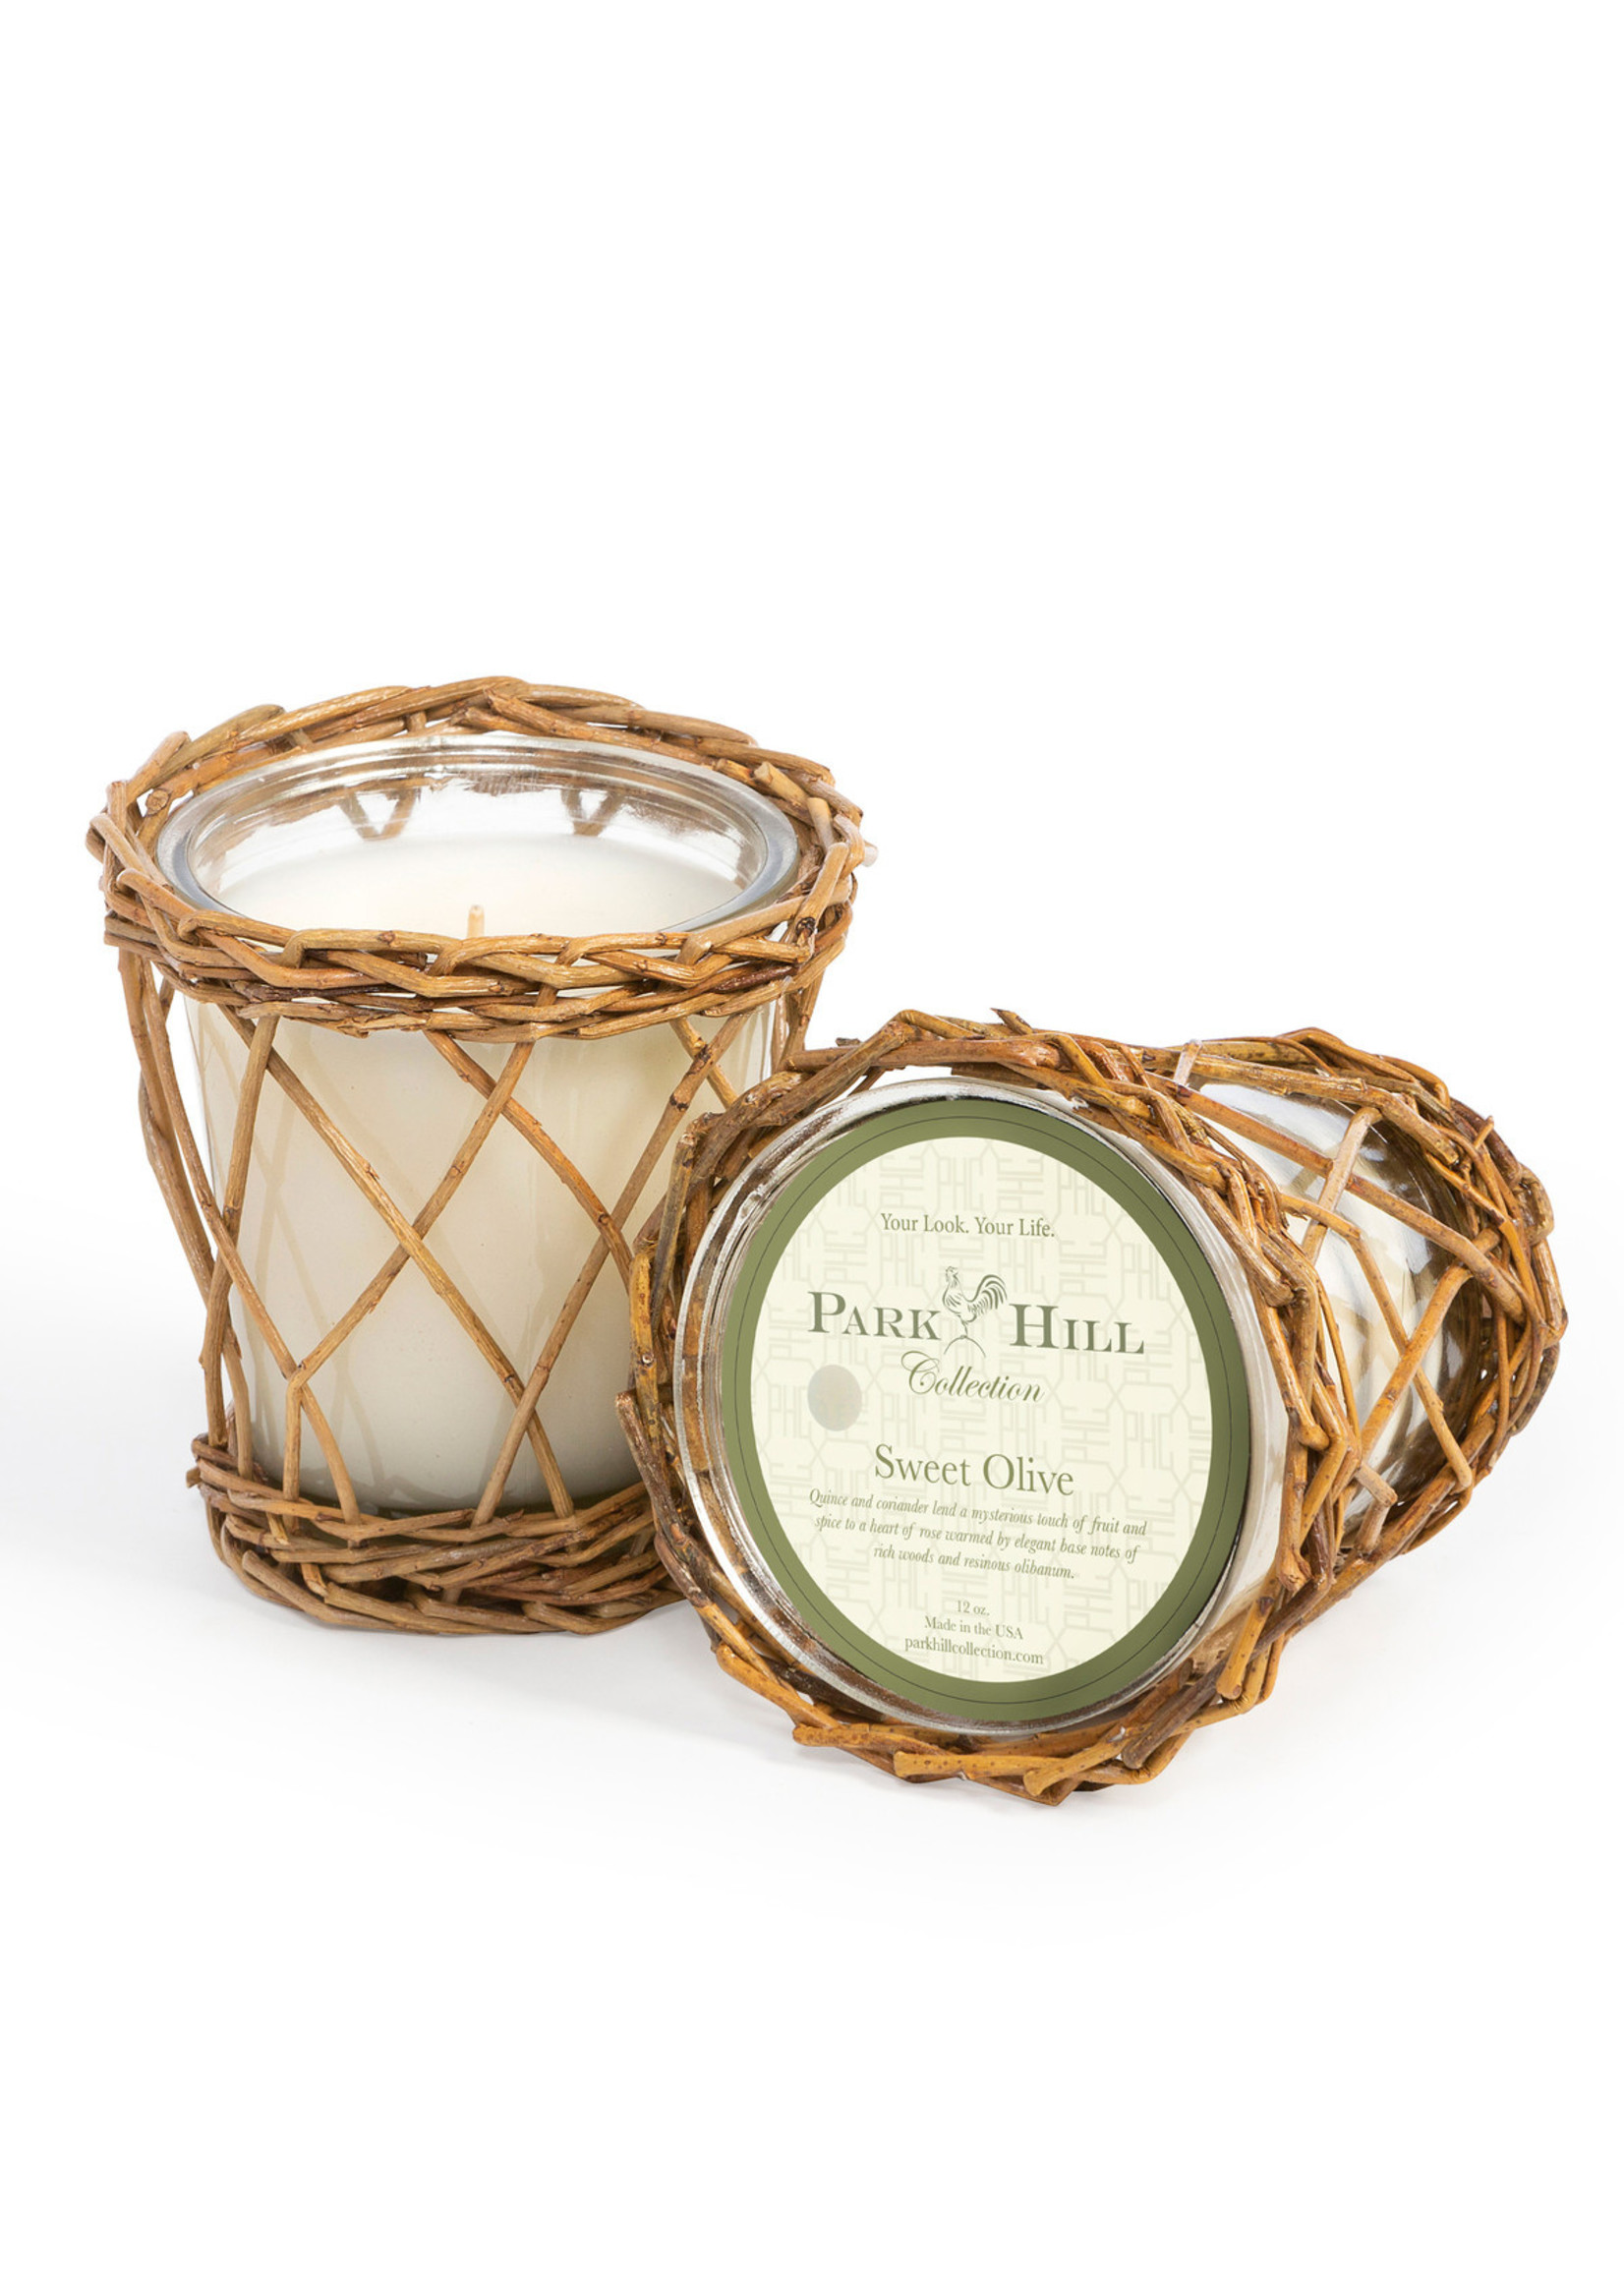 Park Hill Park Hill Candle - Sweet Olive